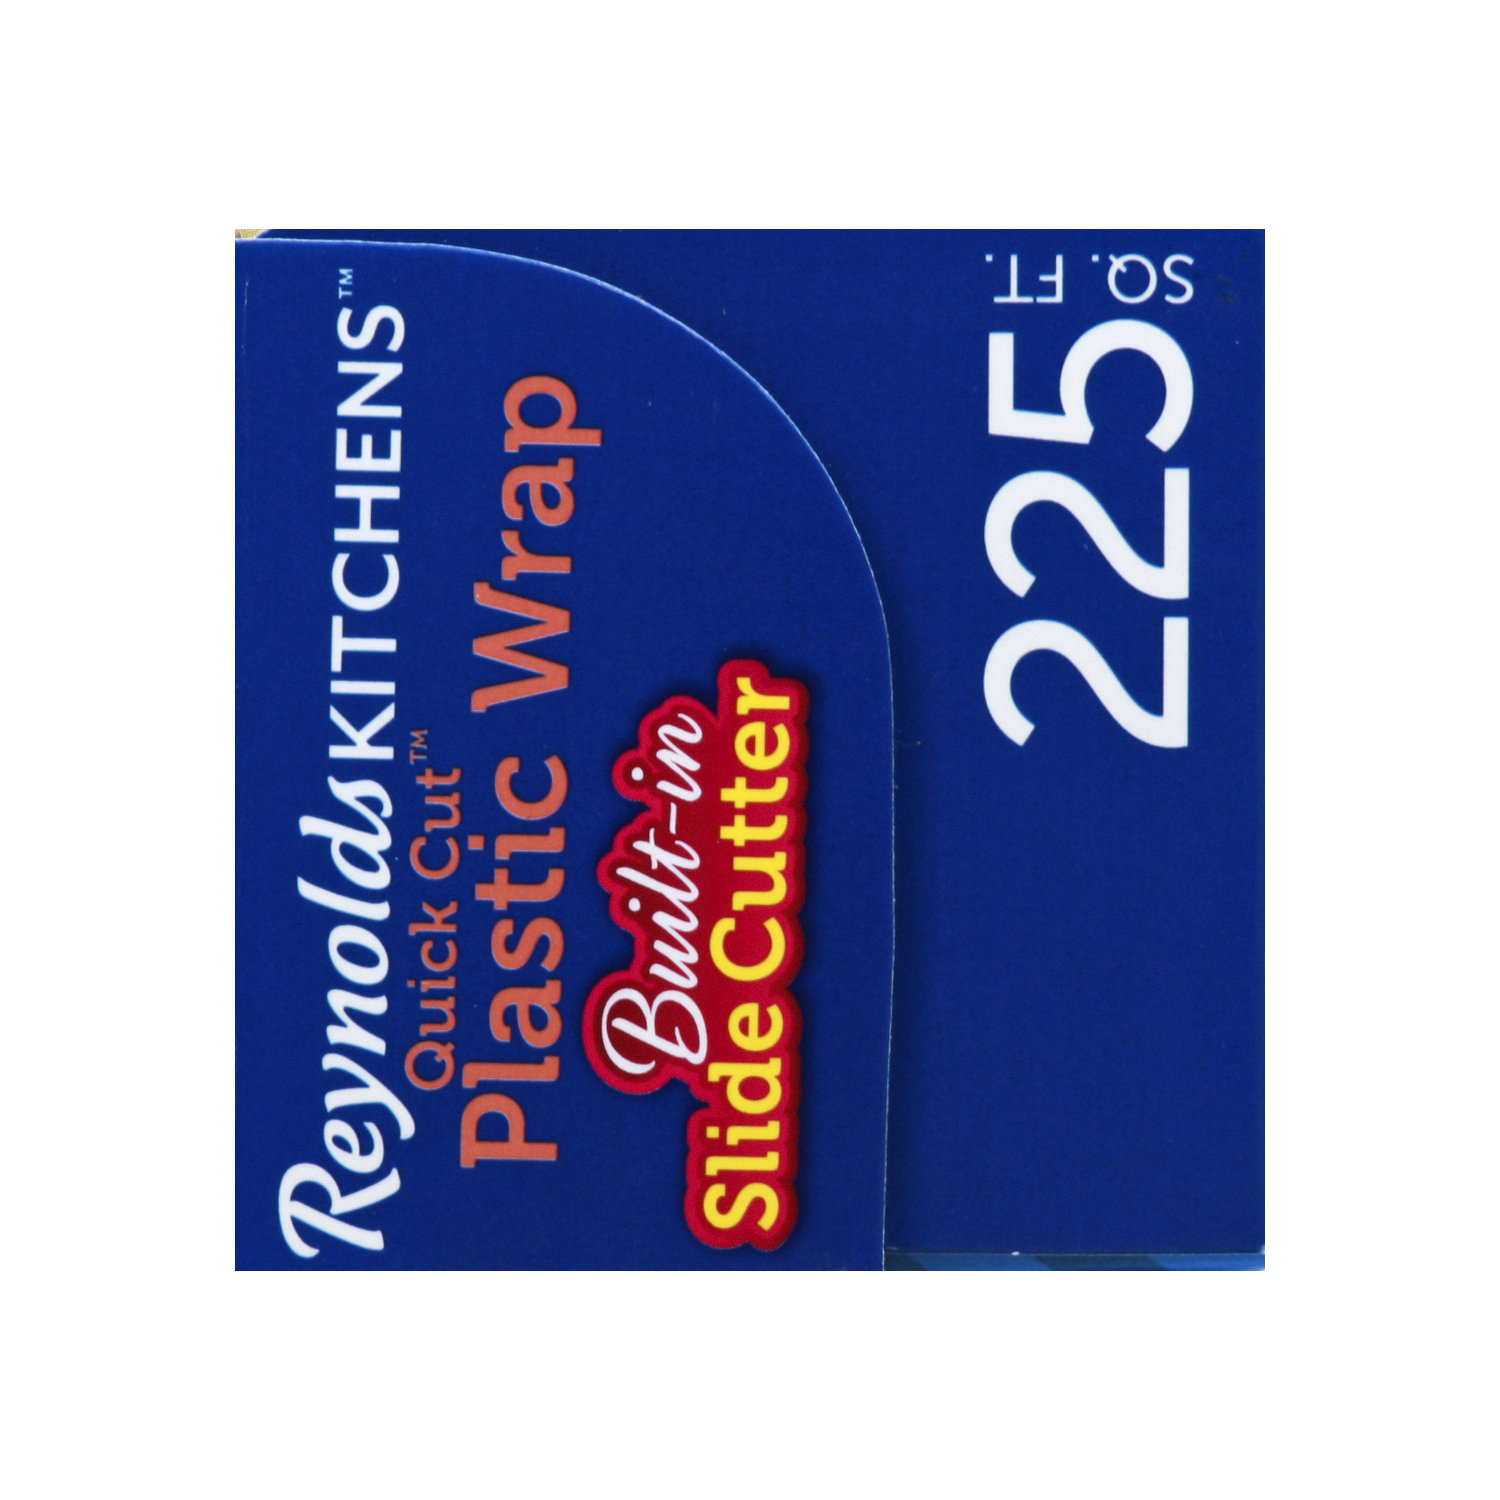 Reynolds Kitchens Plastic Wrap, 225 sq ft - Smith's Food and Drug